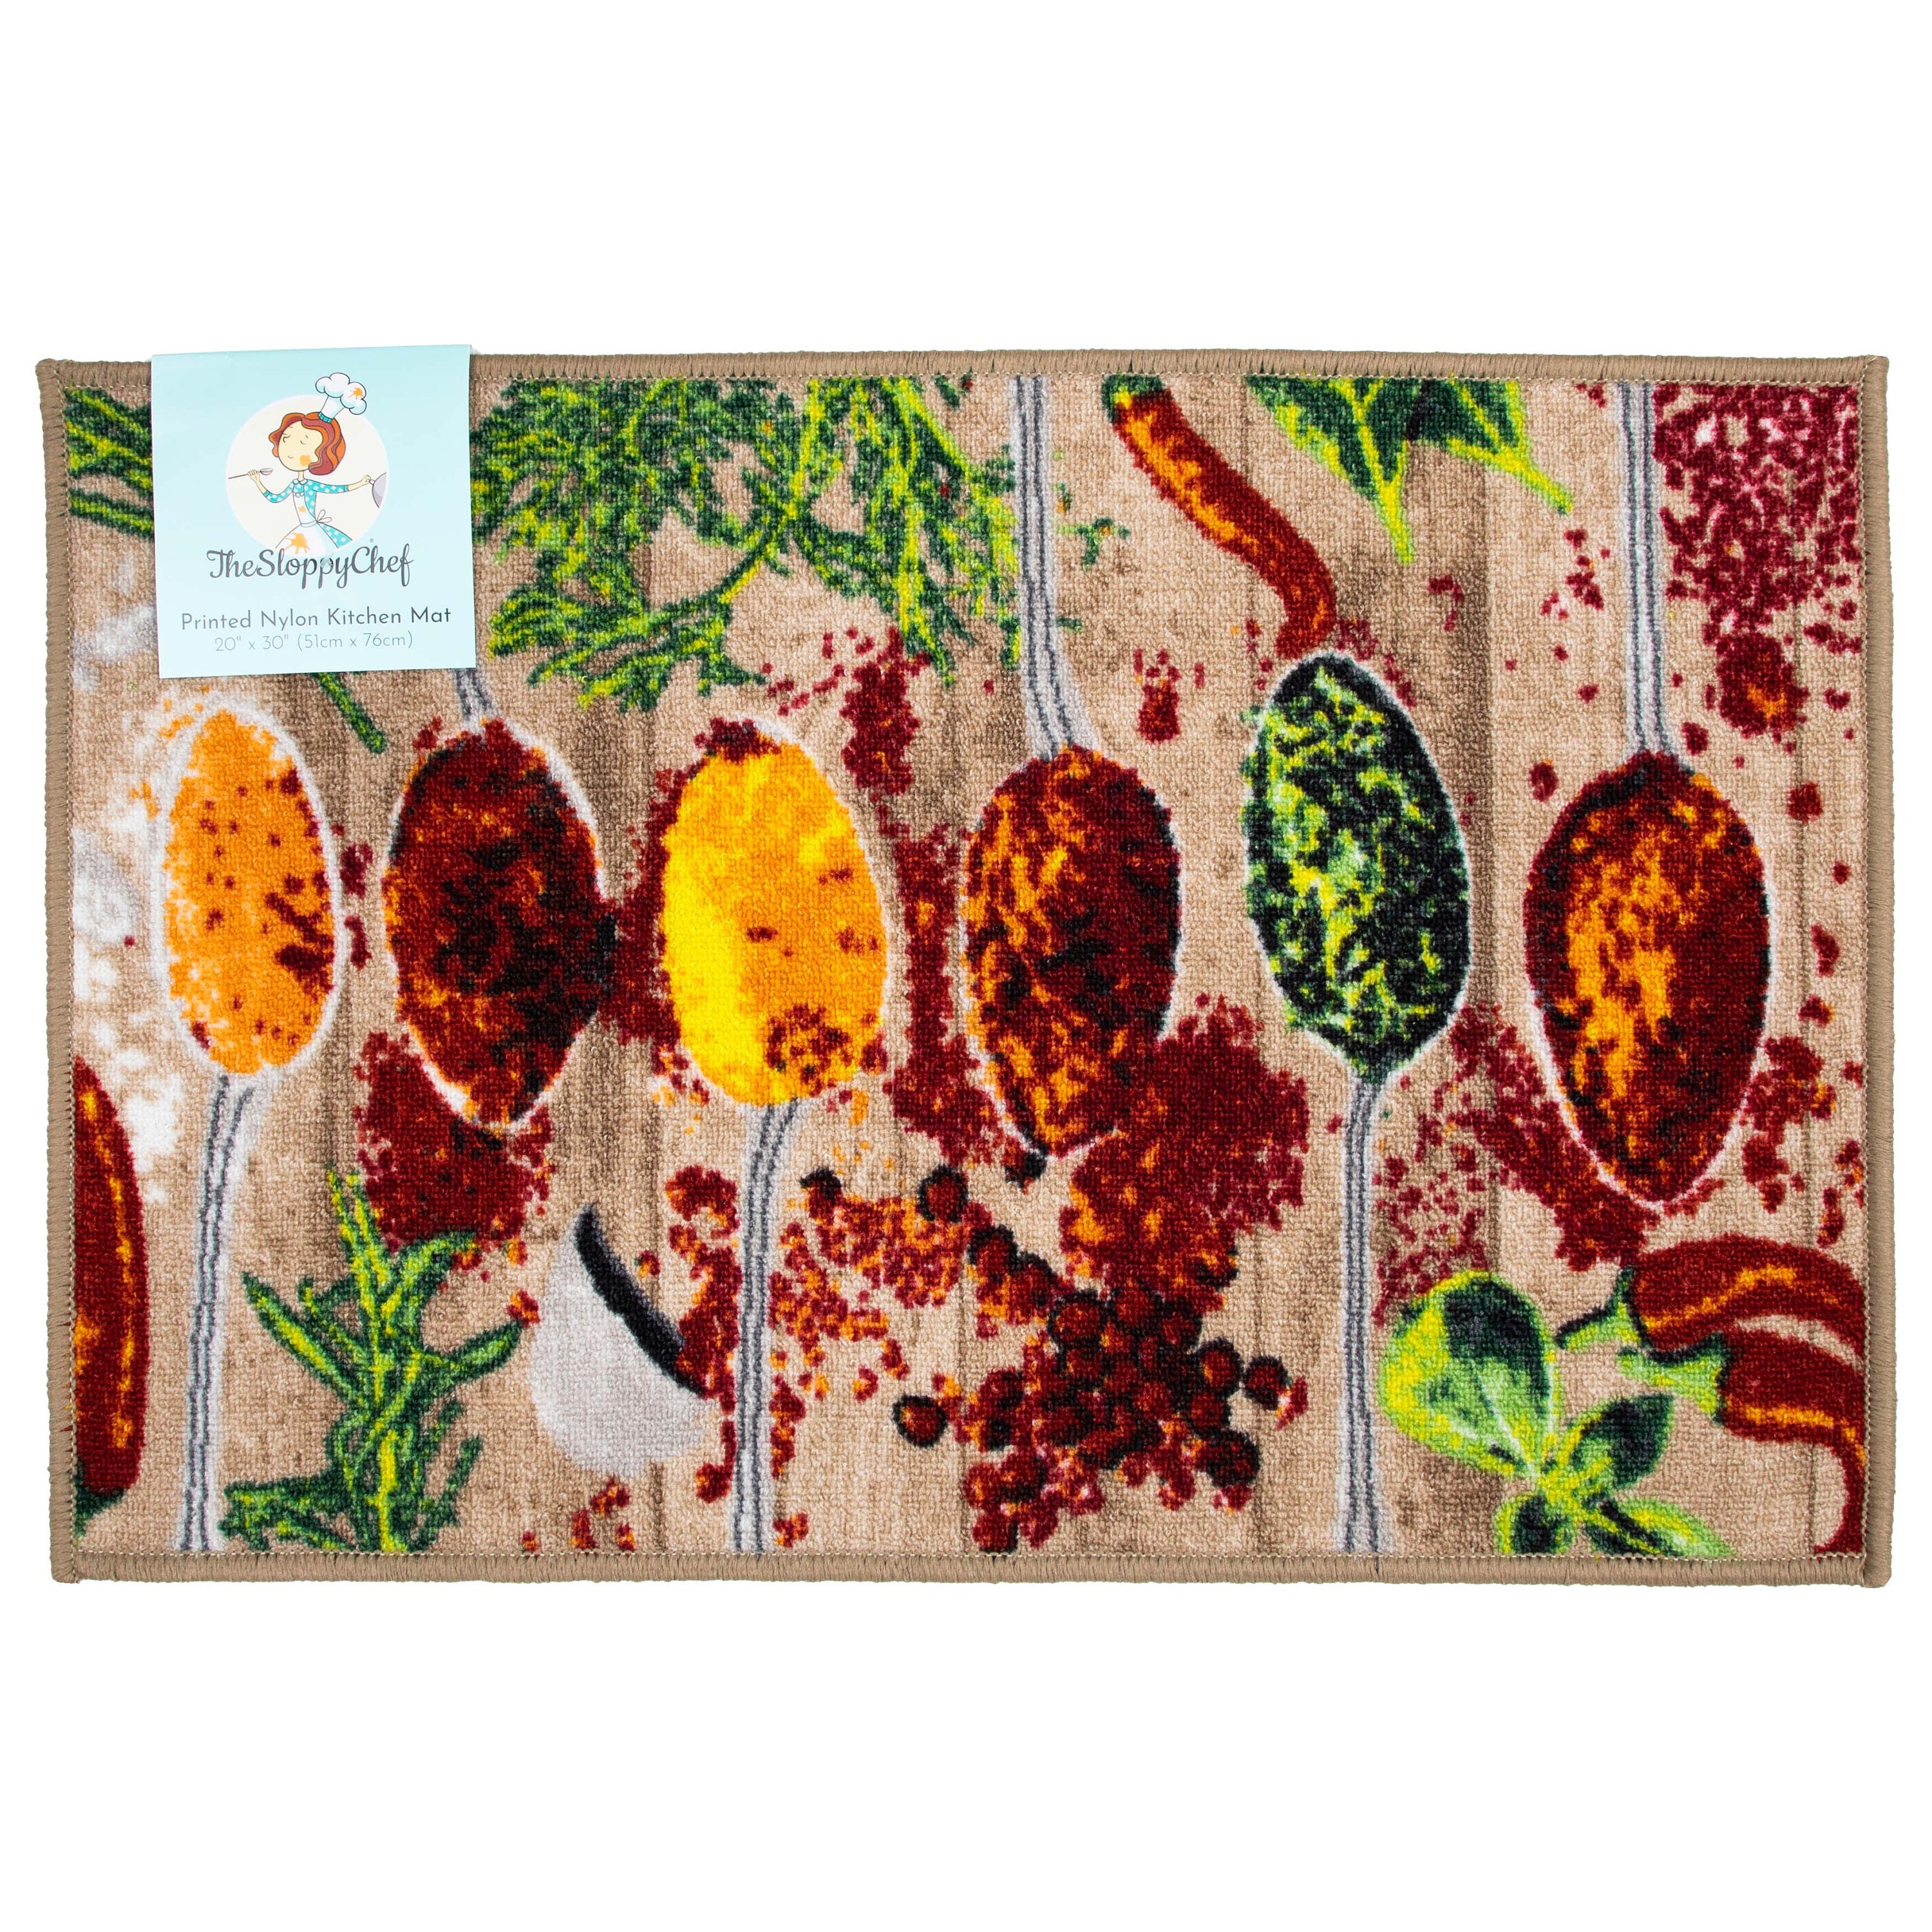 Sloppy Chef Printed Kitchen Area Rug, 20x60, Non-Skid Latex Backing, Design Options, Size: 20 x 60